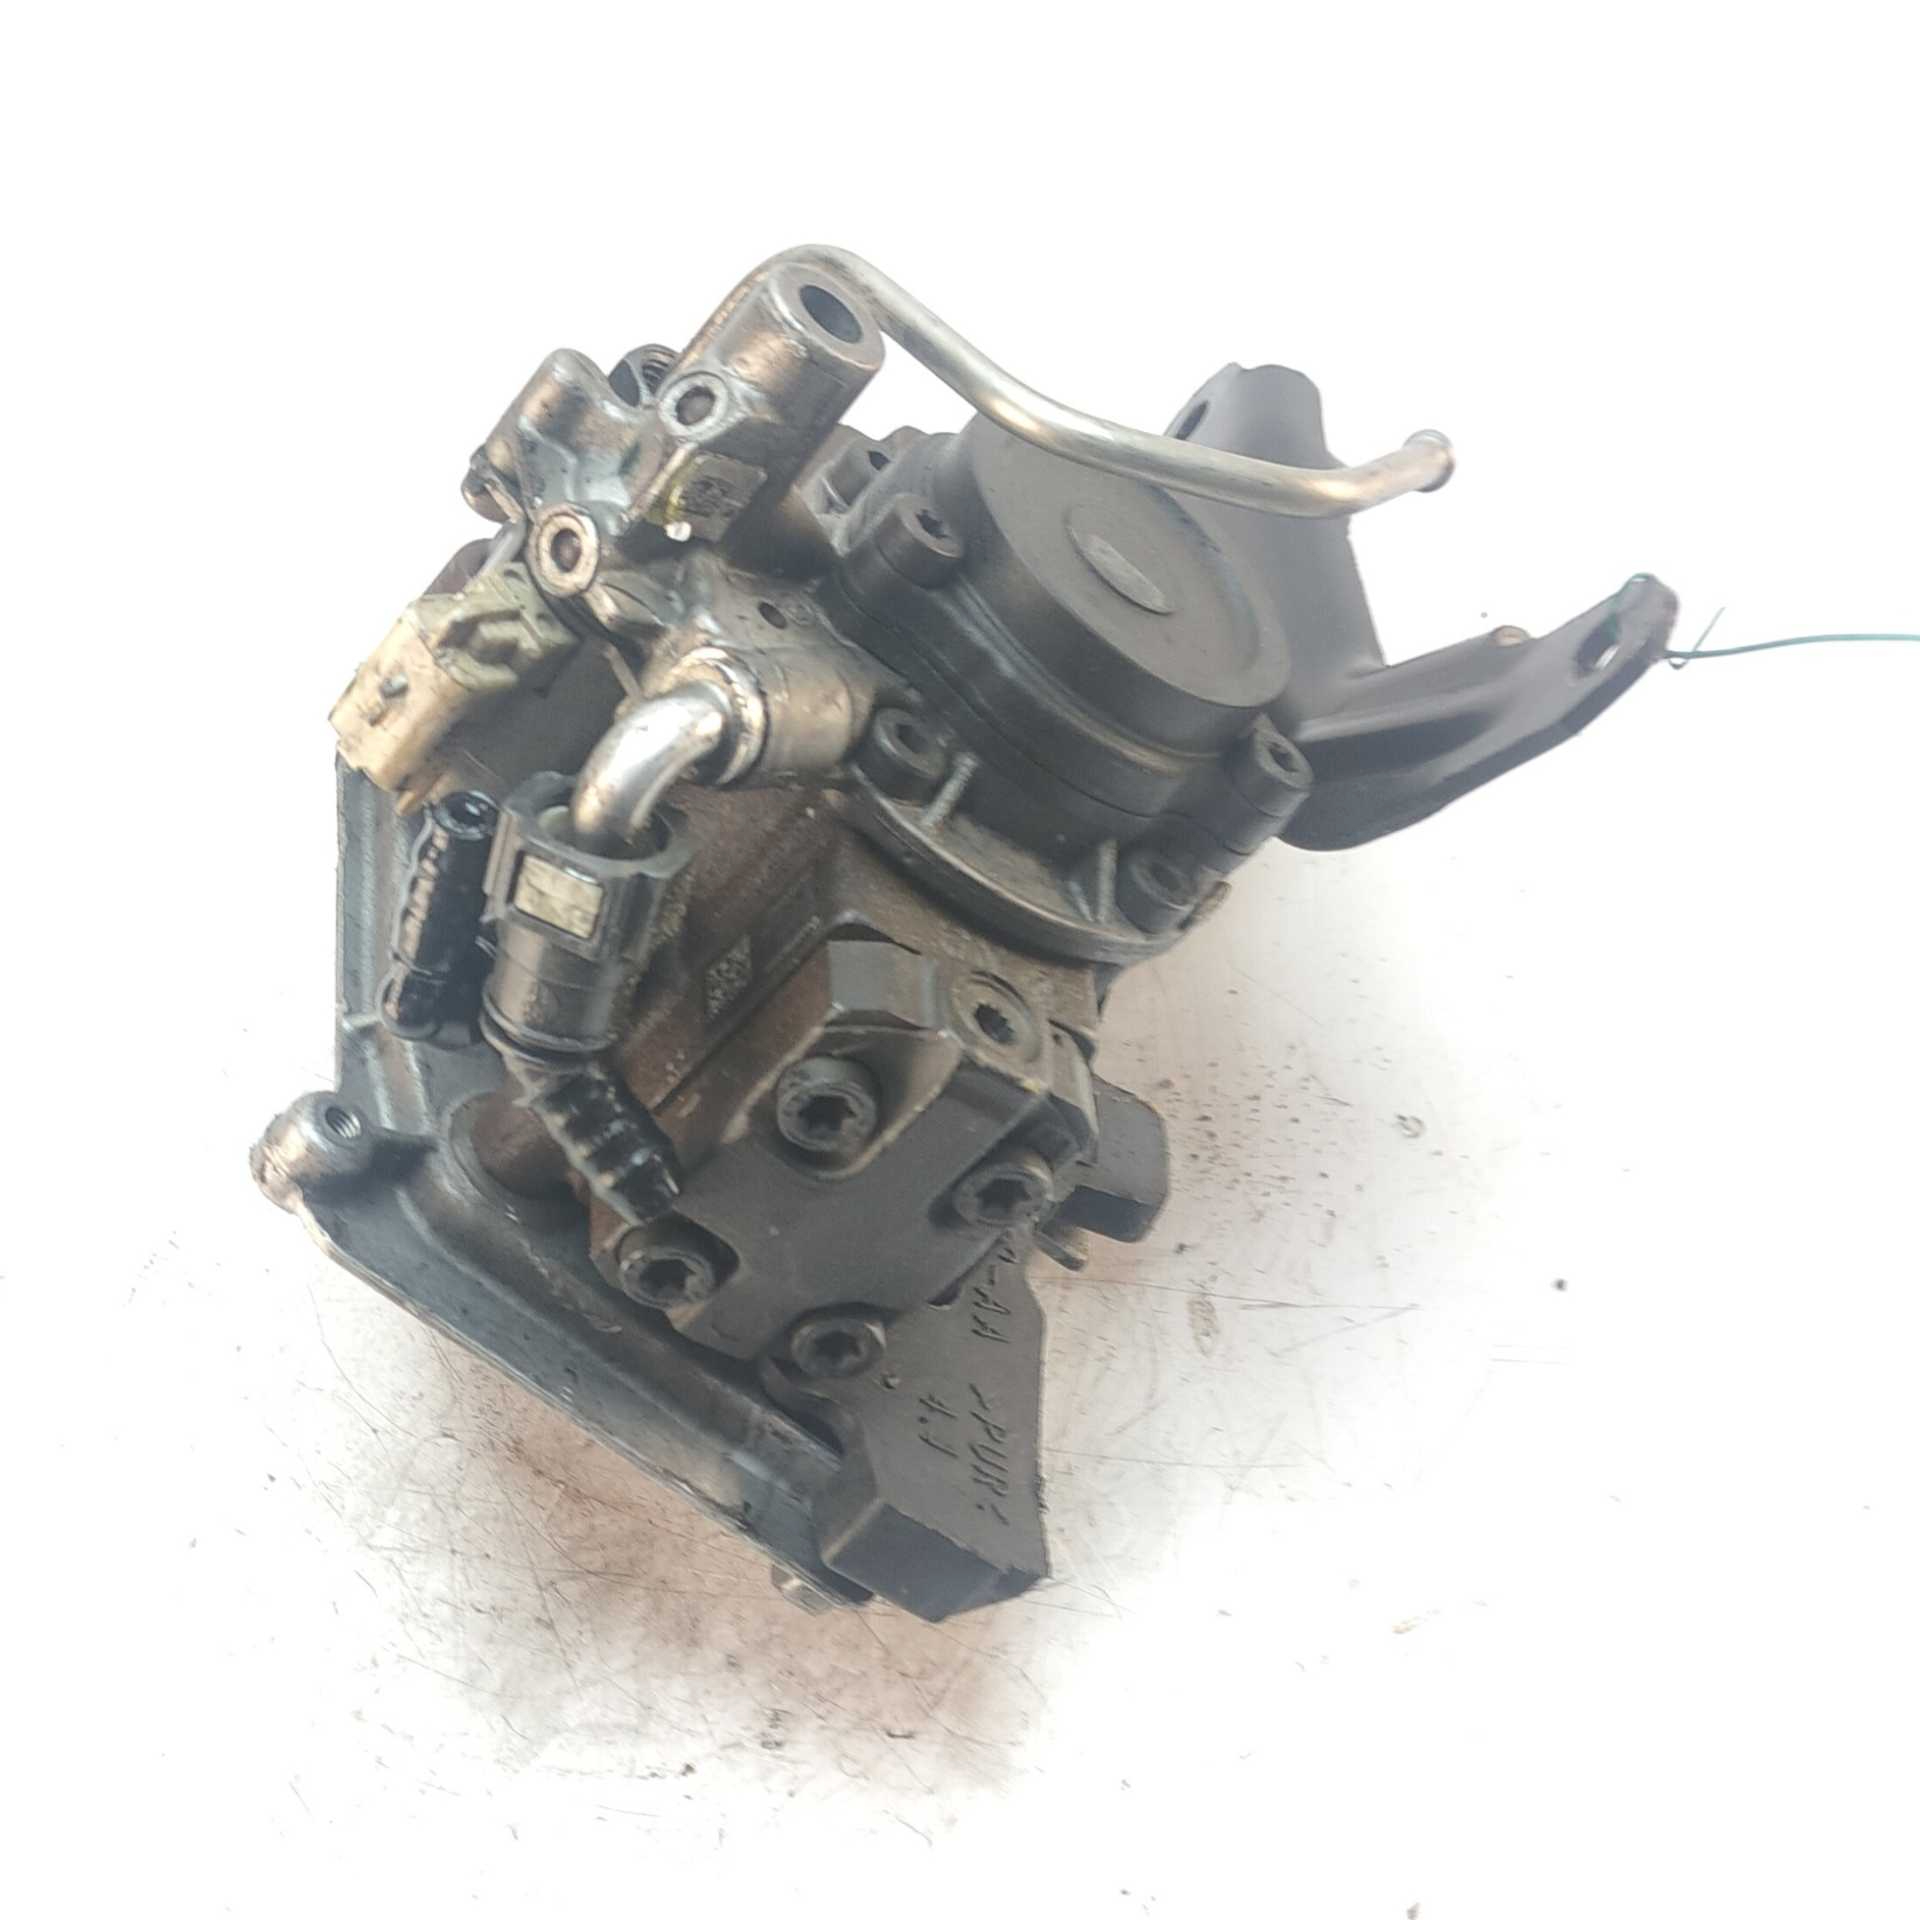 BOMBA COMBUSTIBLE FORD FOCUS C-MAX 1.6 TDCi (80 KW / 109 CV) (10.2003 - 03.2007)